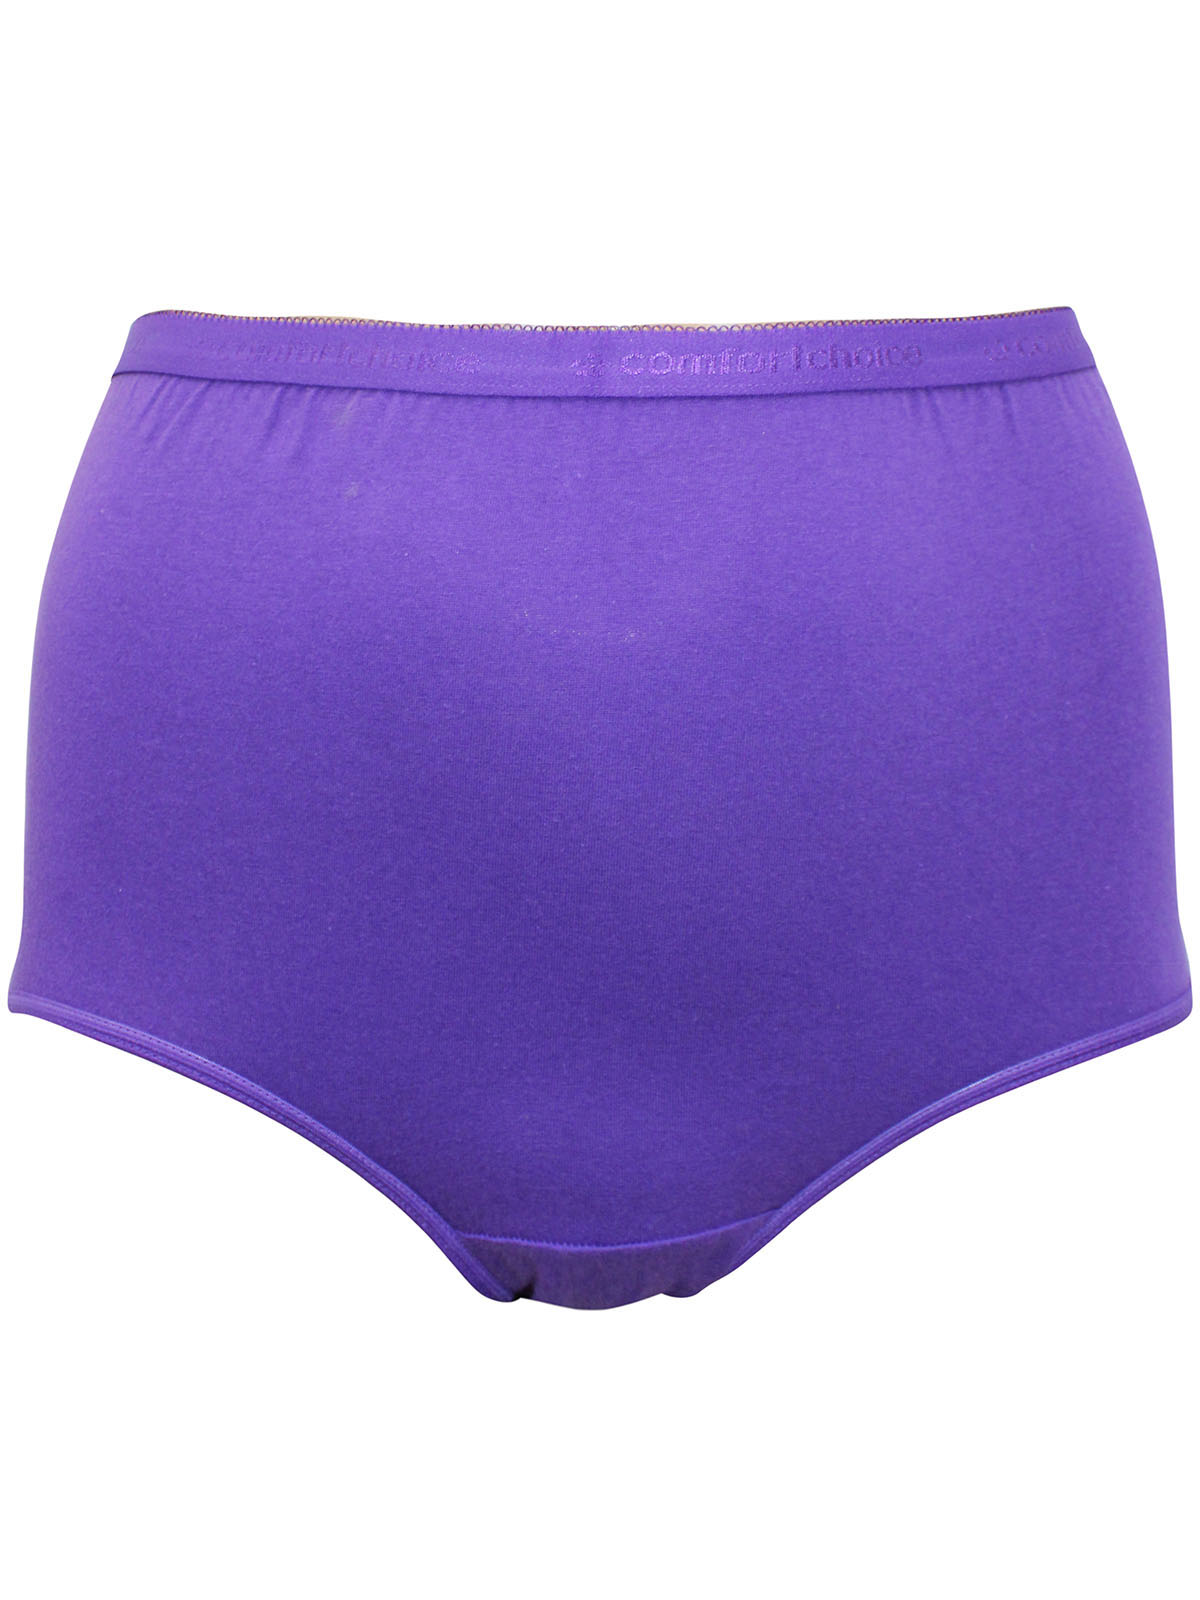 New Luxurious Comfort Choice 100% Nylon Full Coverage Brief Panty Royal  Blue Size 7 L -  Norway